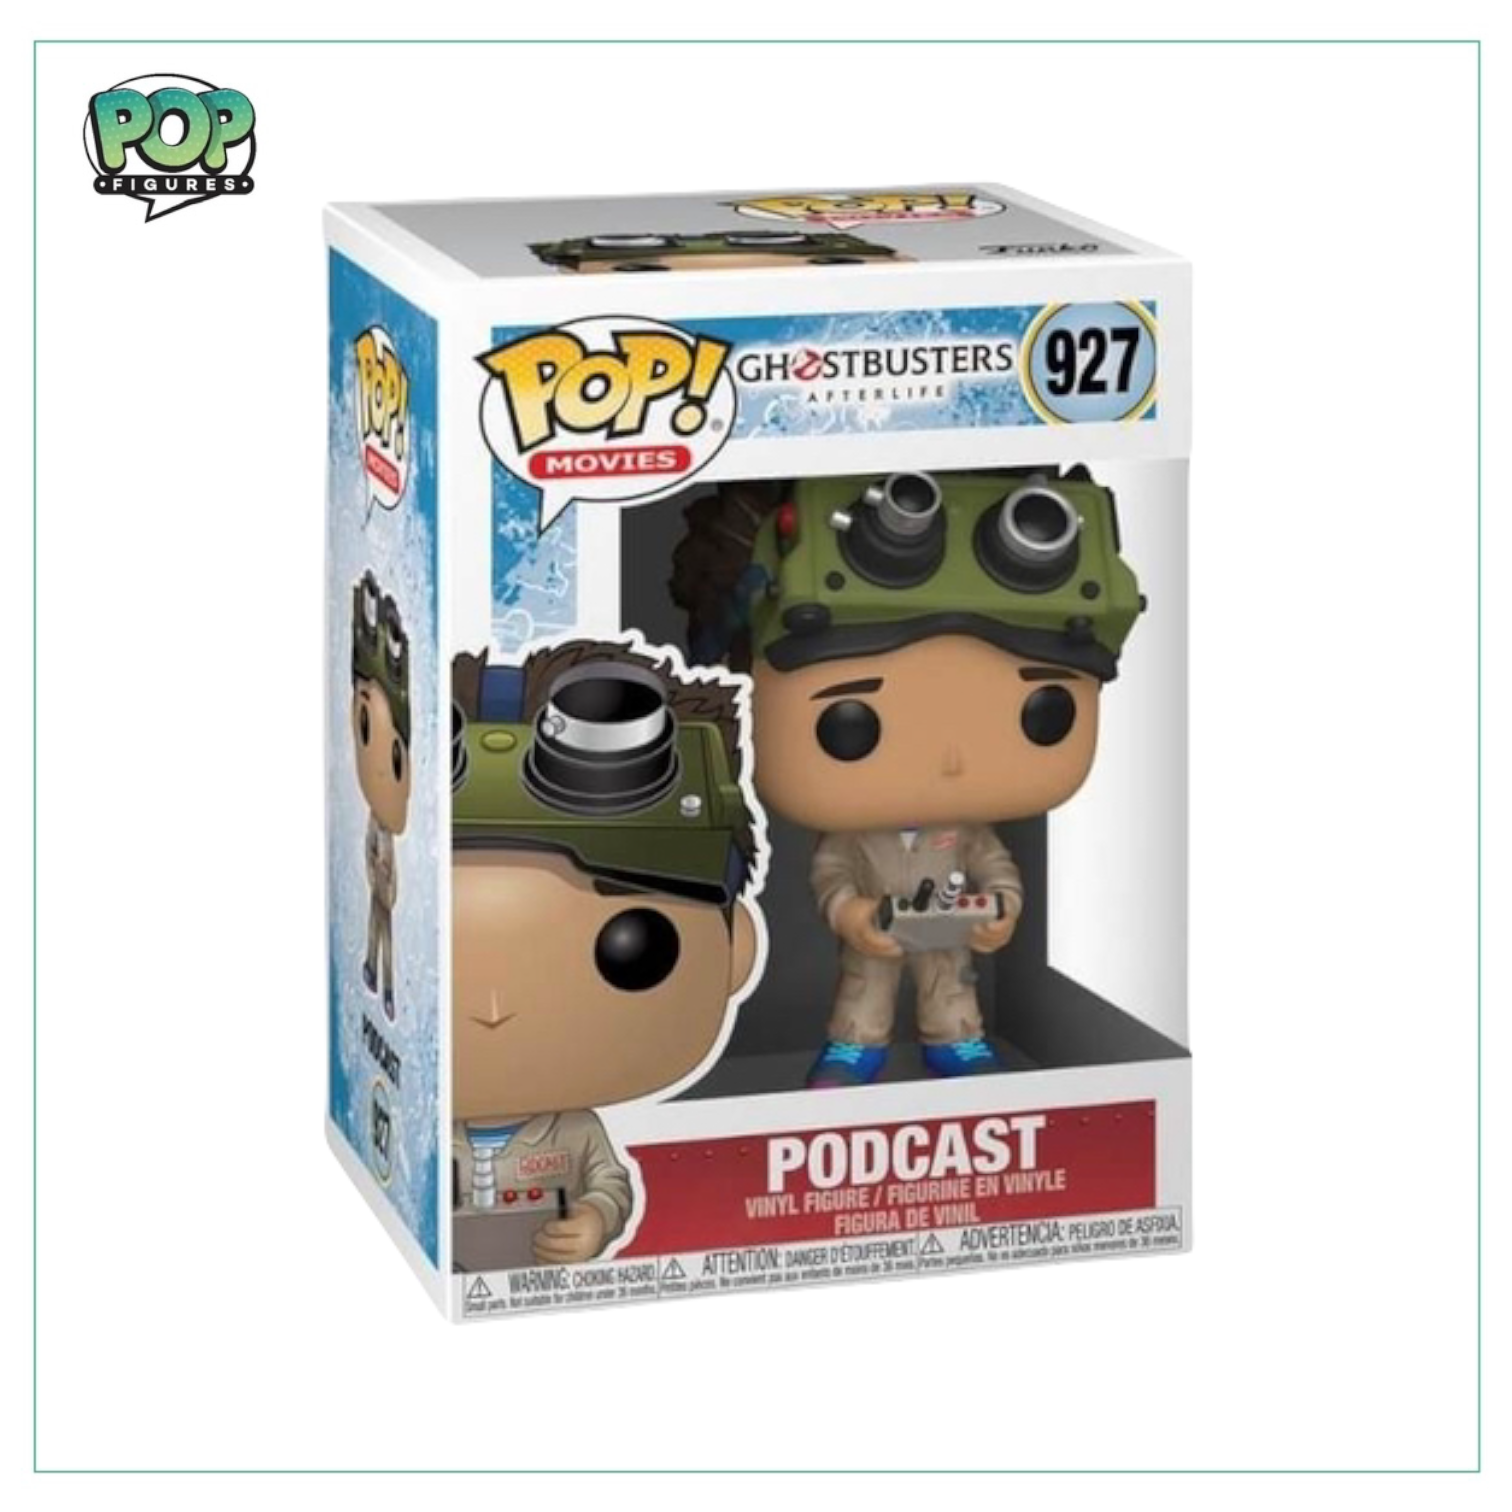 Podcast #927 Funko Pop! Ghostbusters: Afterlife